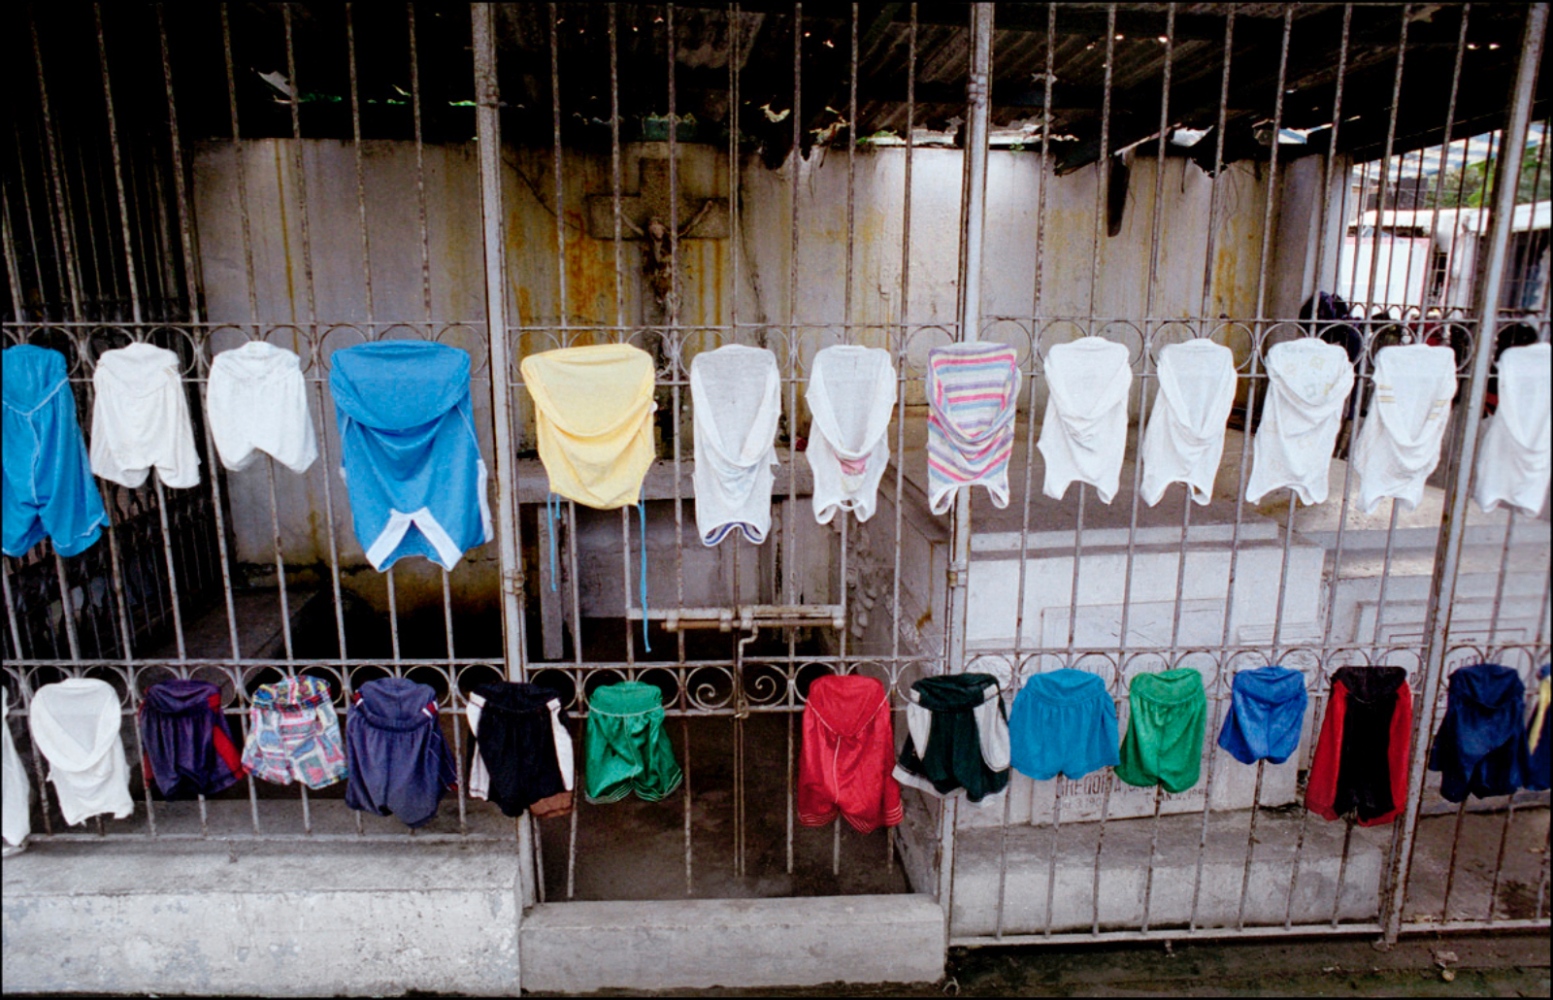 Philippines, Cemeteries -                  Childrenâ€™s Laundry Hanging on Gate,...